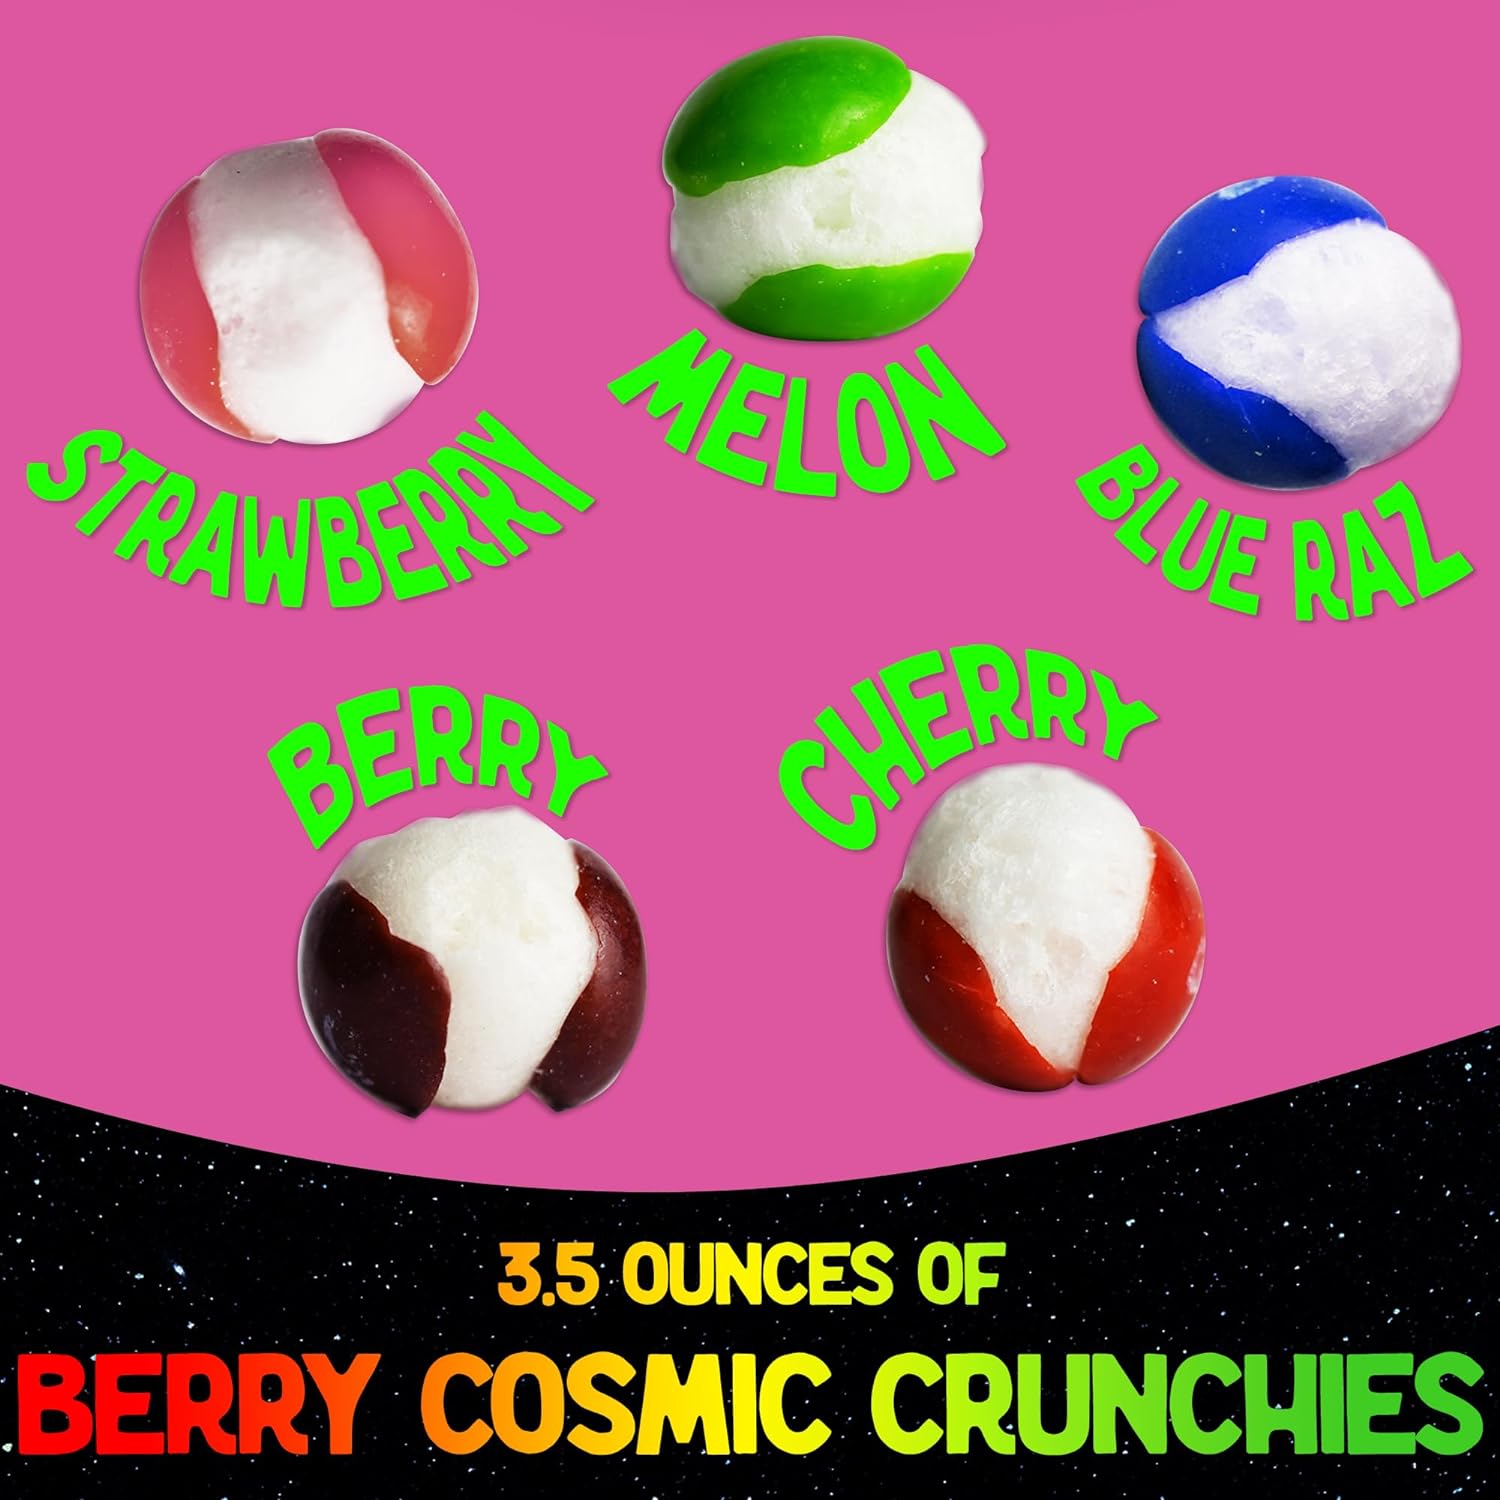 2 Pack Freeze Dried Candy Lemon Stars and Lemon Berry Cosmic Crunchies